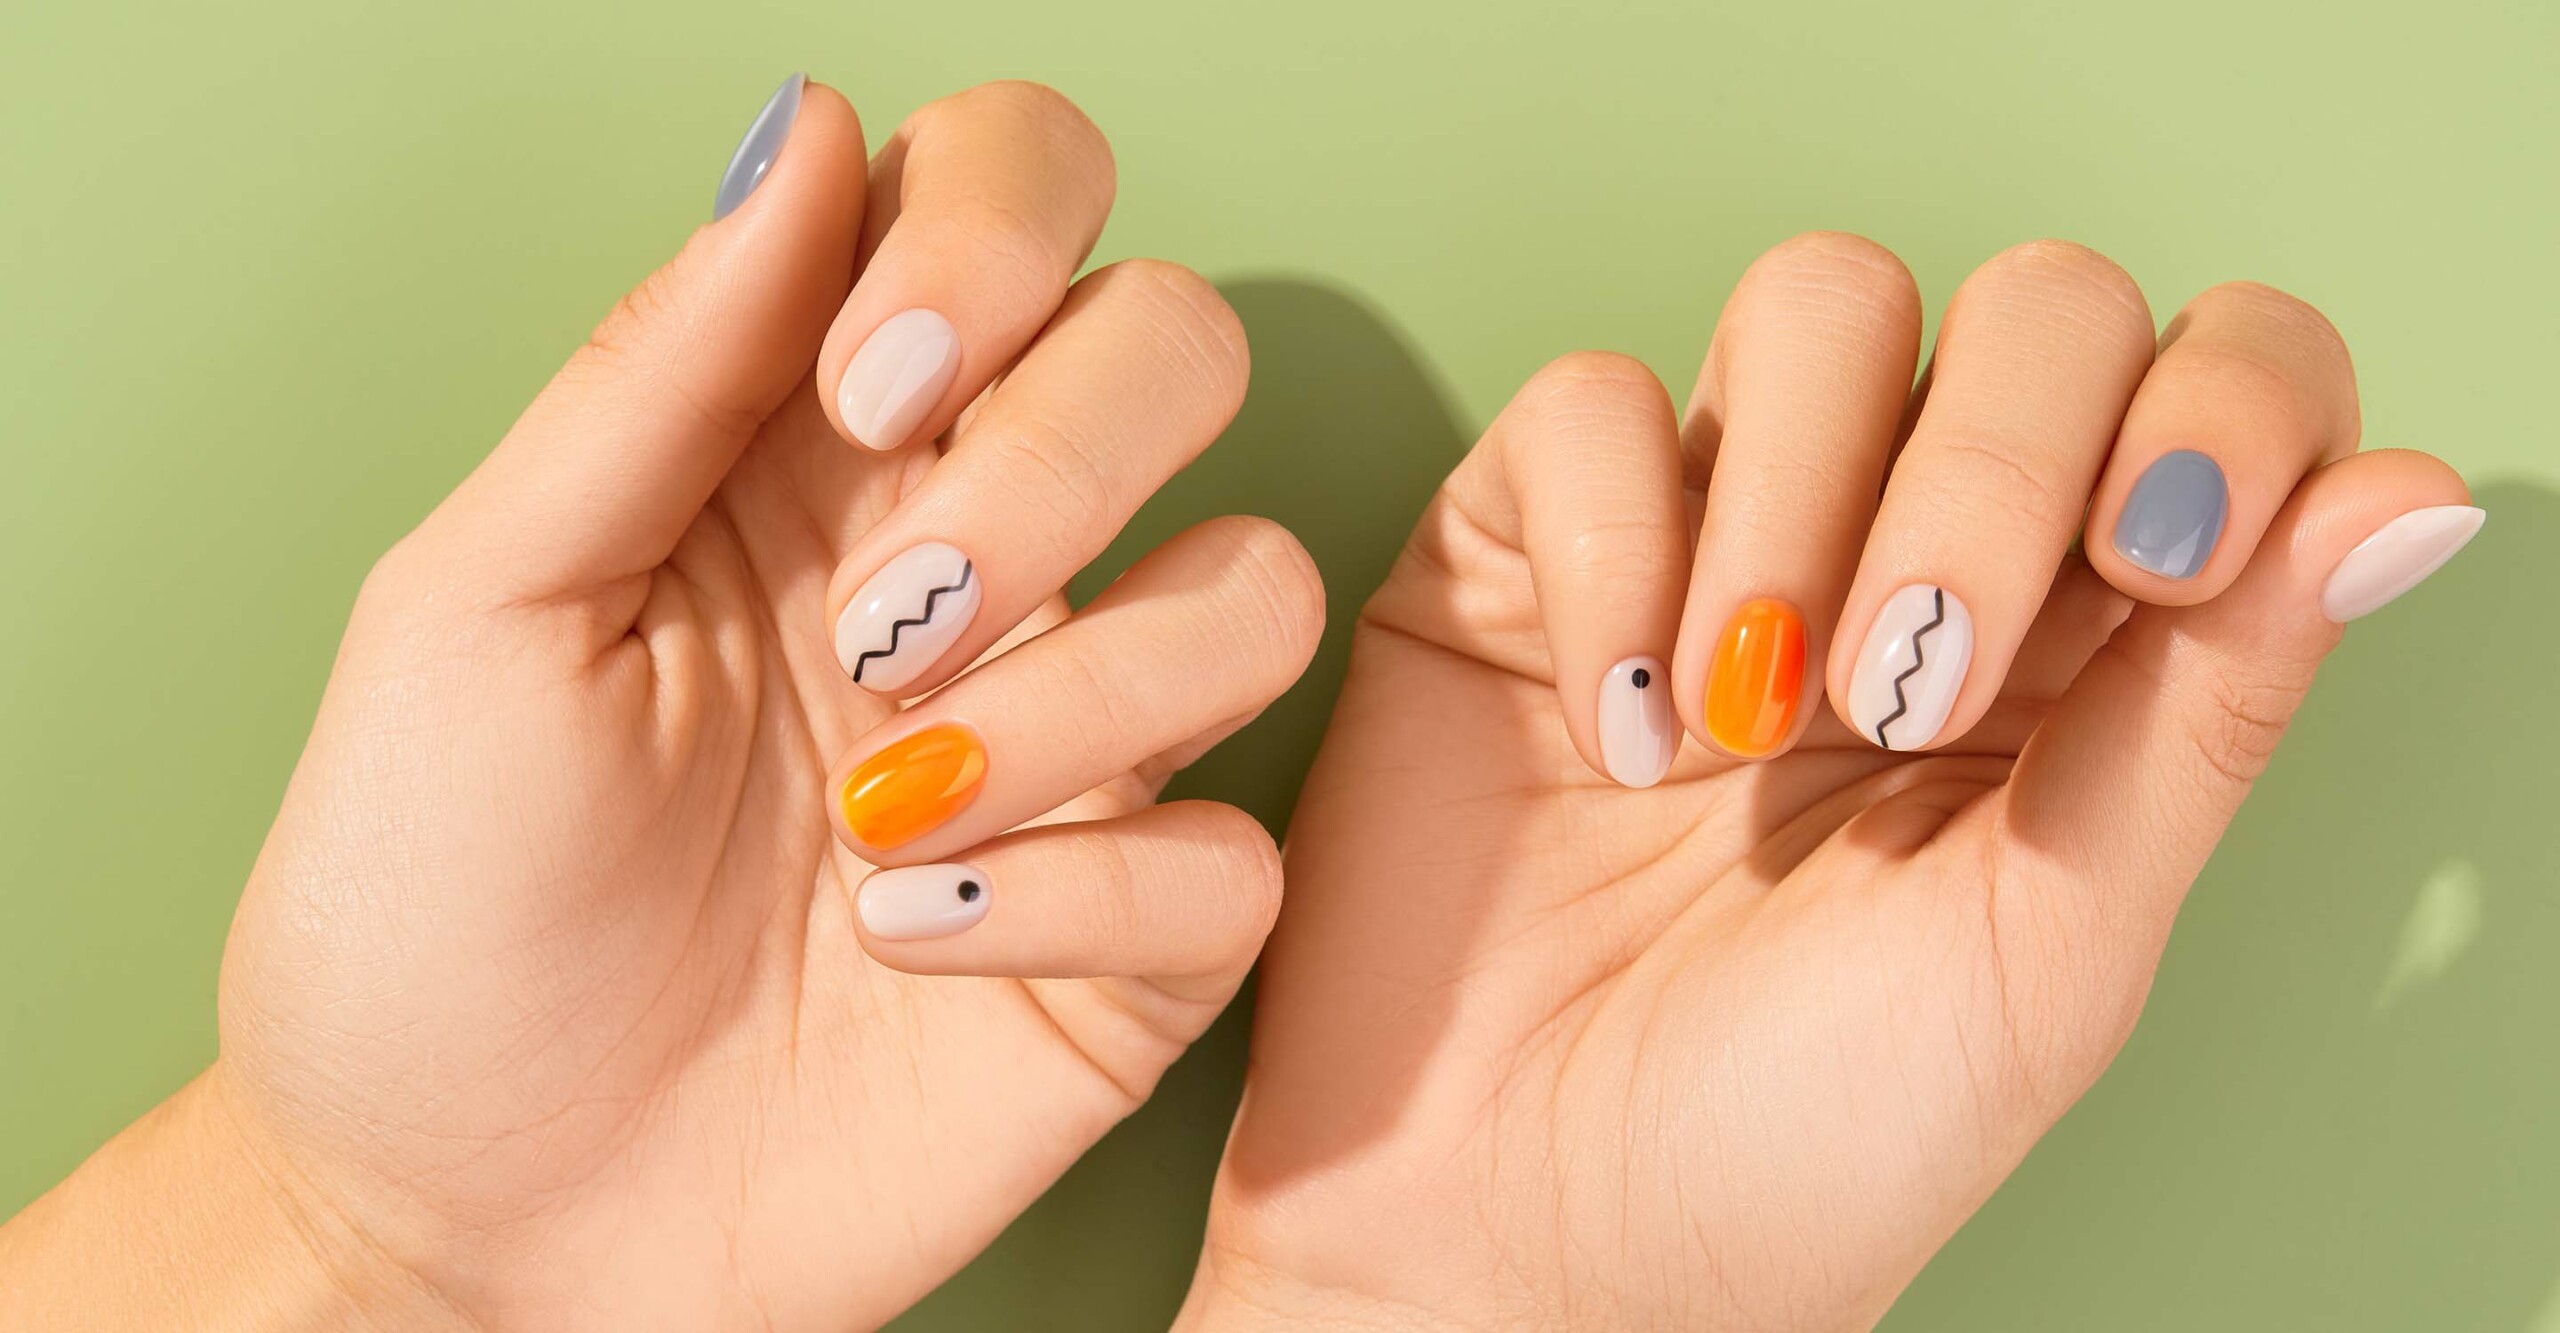 two hands with pearl, orange, grey and patterned nails against a light green background